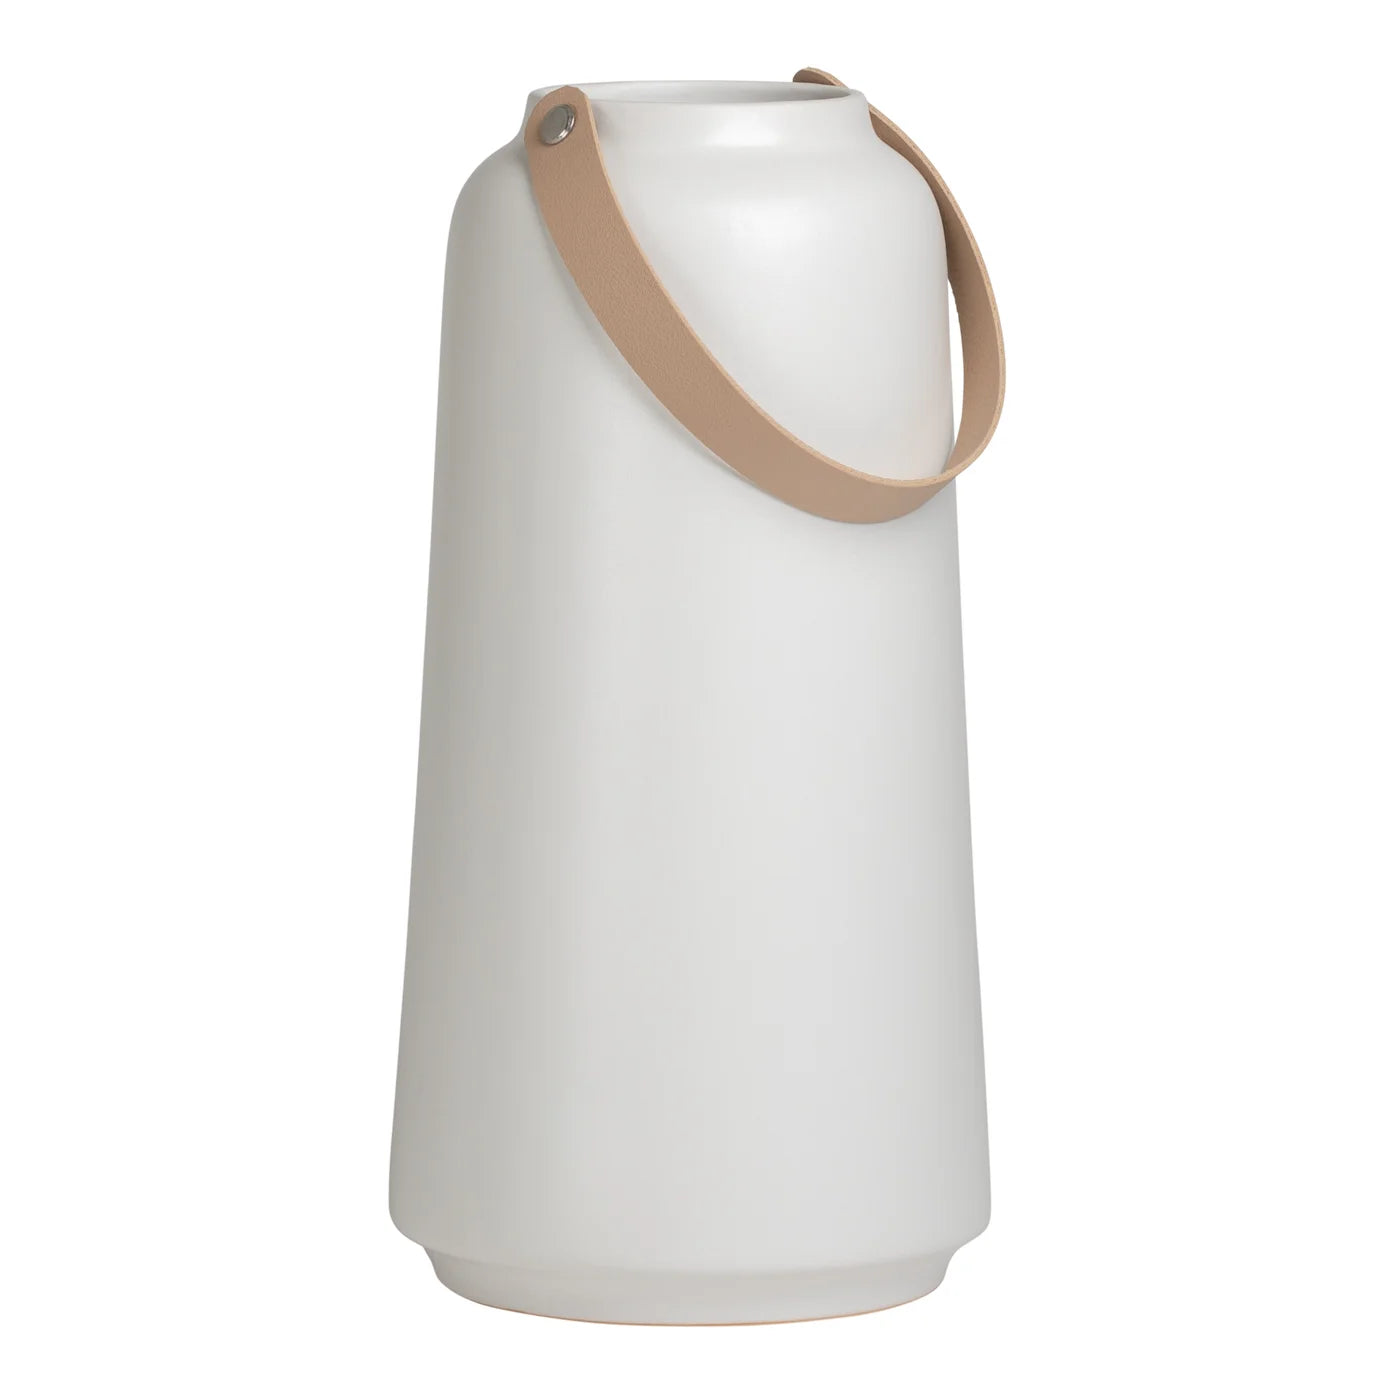 Lido White Ceramic Vases with Faux Leather Handle